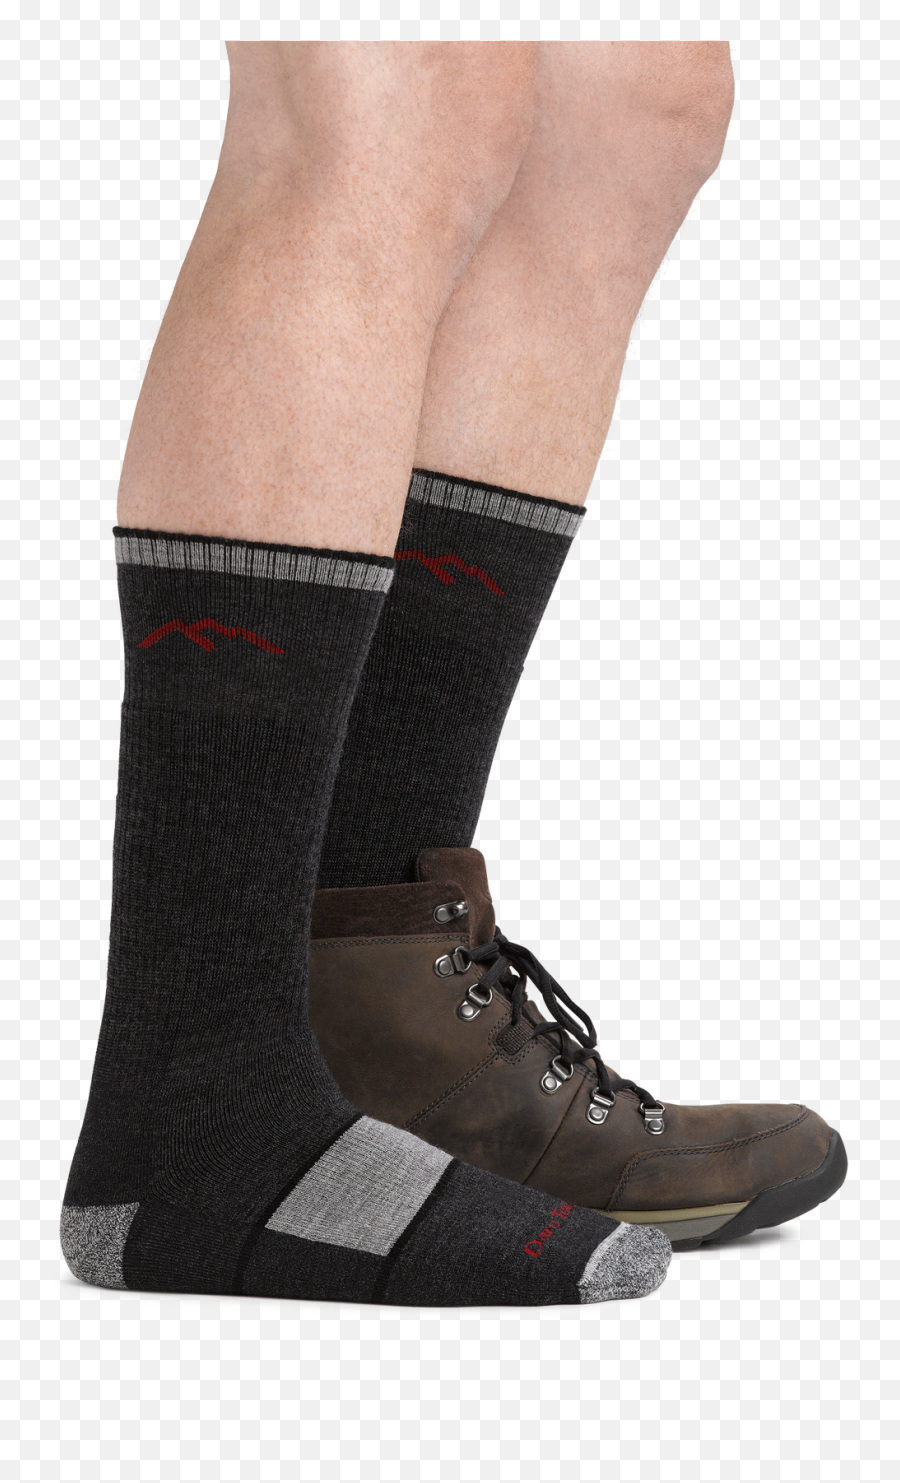 Menu0027s Hiker Boot Midweight Hiking Socks U2013 Darn Tough Sock Png Timberland Icon Roll - top Leather And Fabric